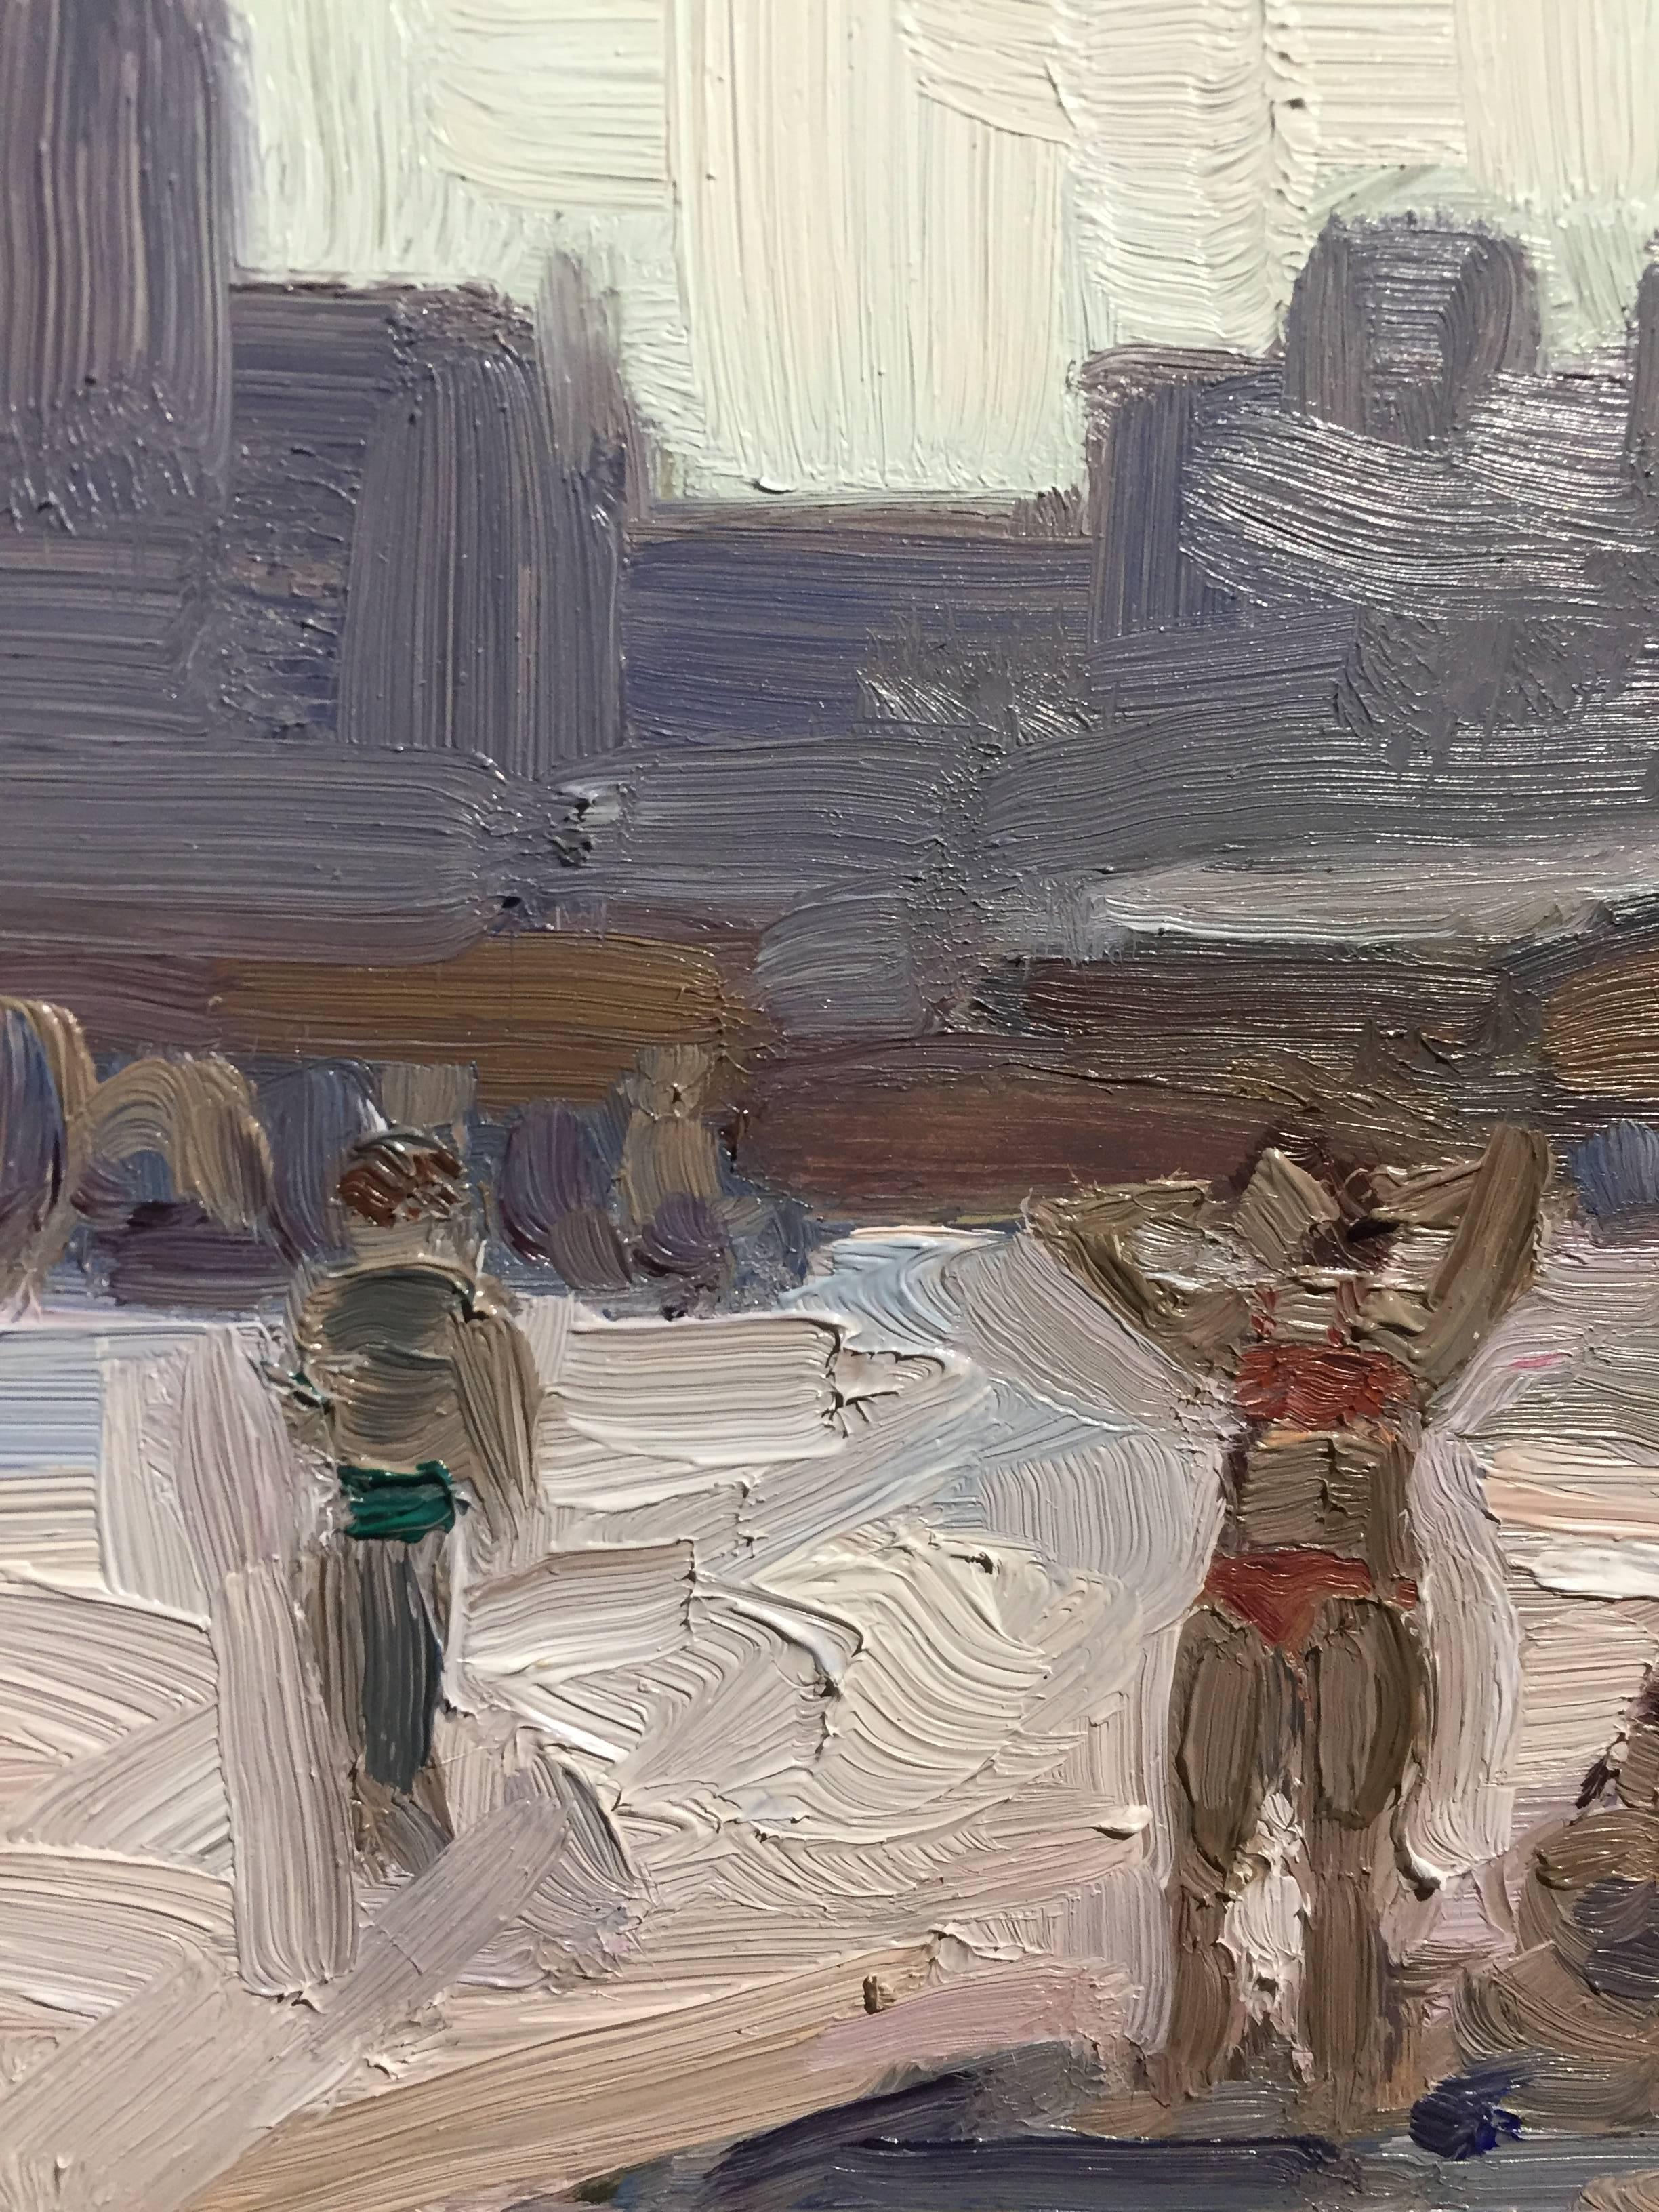 Painted en plein air at a beach near Coney Island, Brooklyn, an expressionistic scene with figures in the sandy foreground and a geometric monochromatic skyline. The 